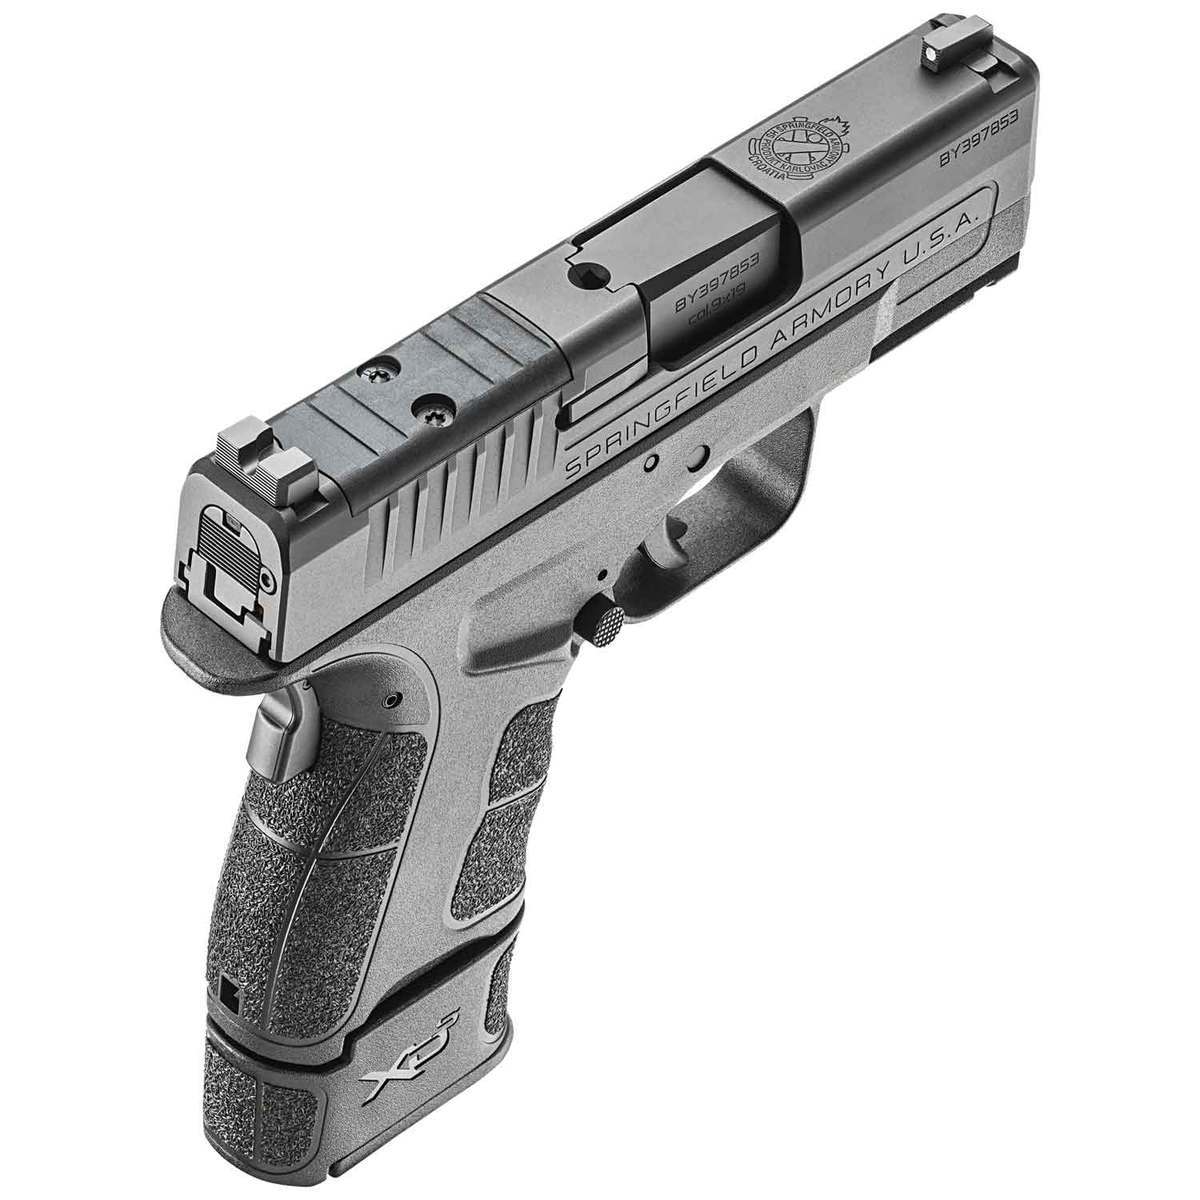 springfield-armory-xd-s-mod-2-osp-9mm-luger-3-3in-black-pistol-9-1-rounds-sportsman-s-warehouse